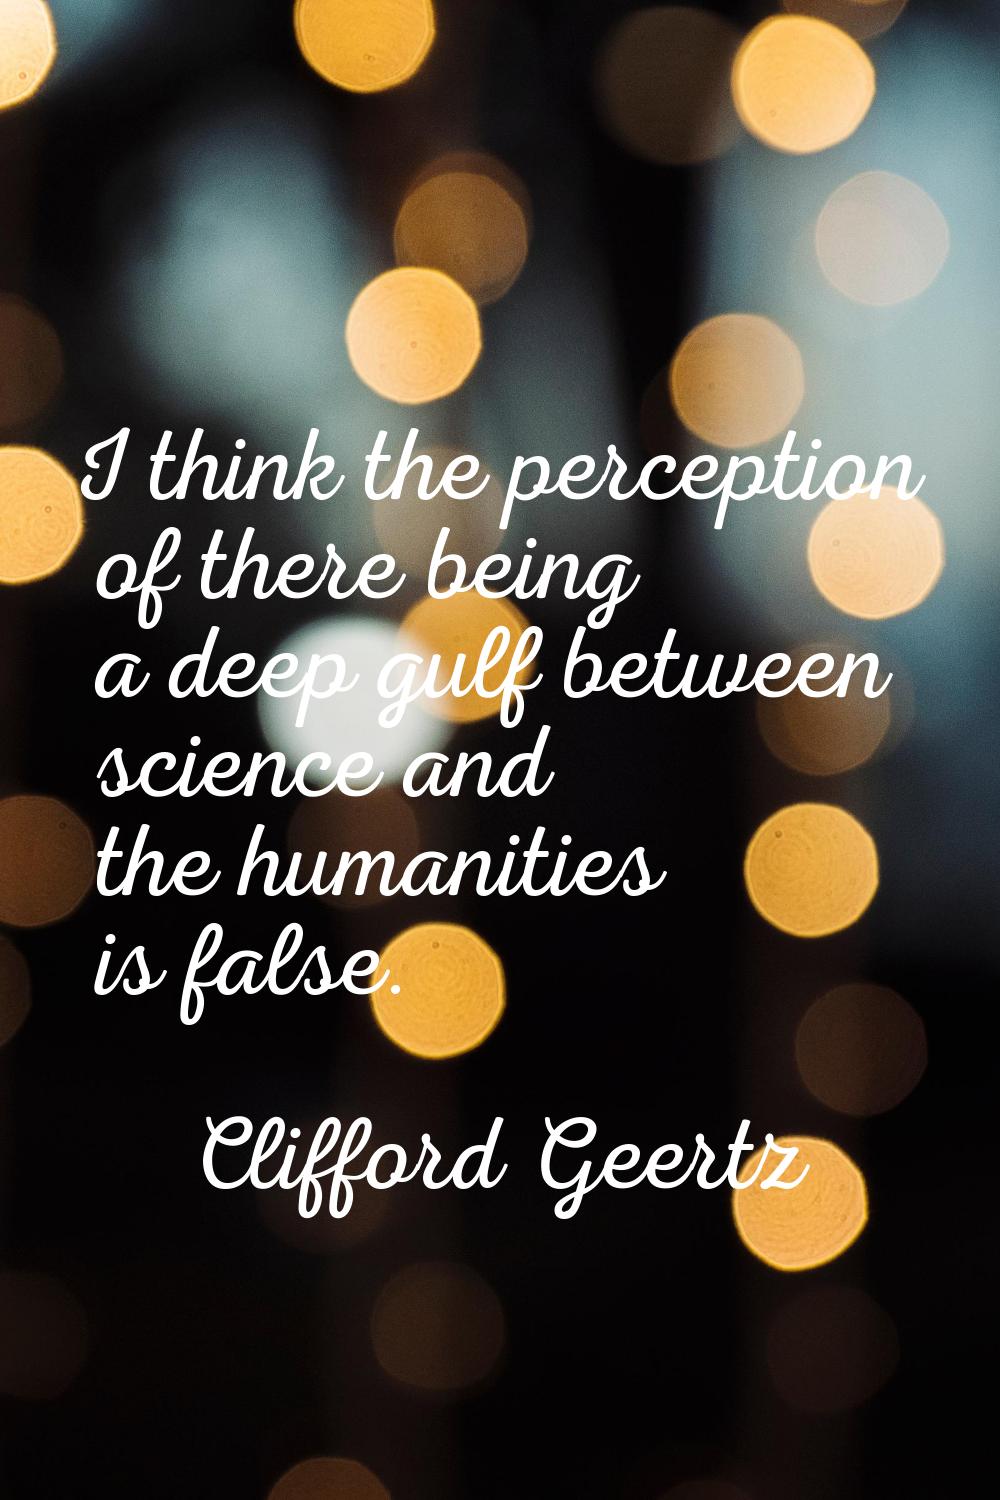 I think the perception of there being a deep gulf between science and the humanities is false.